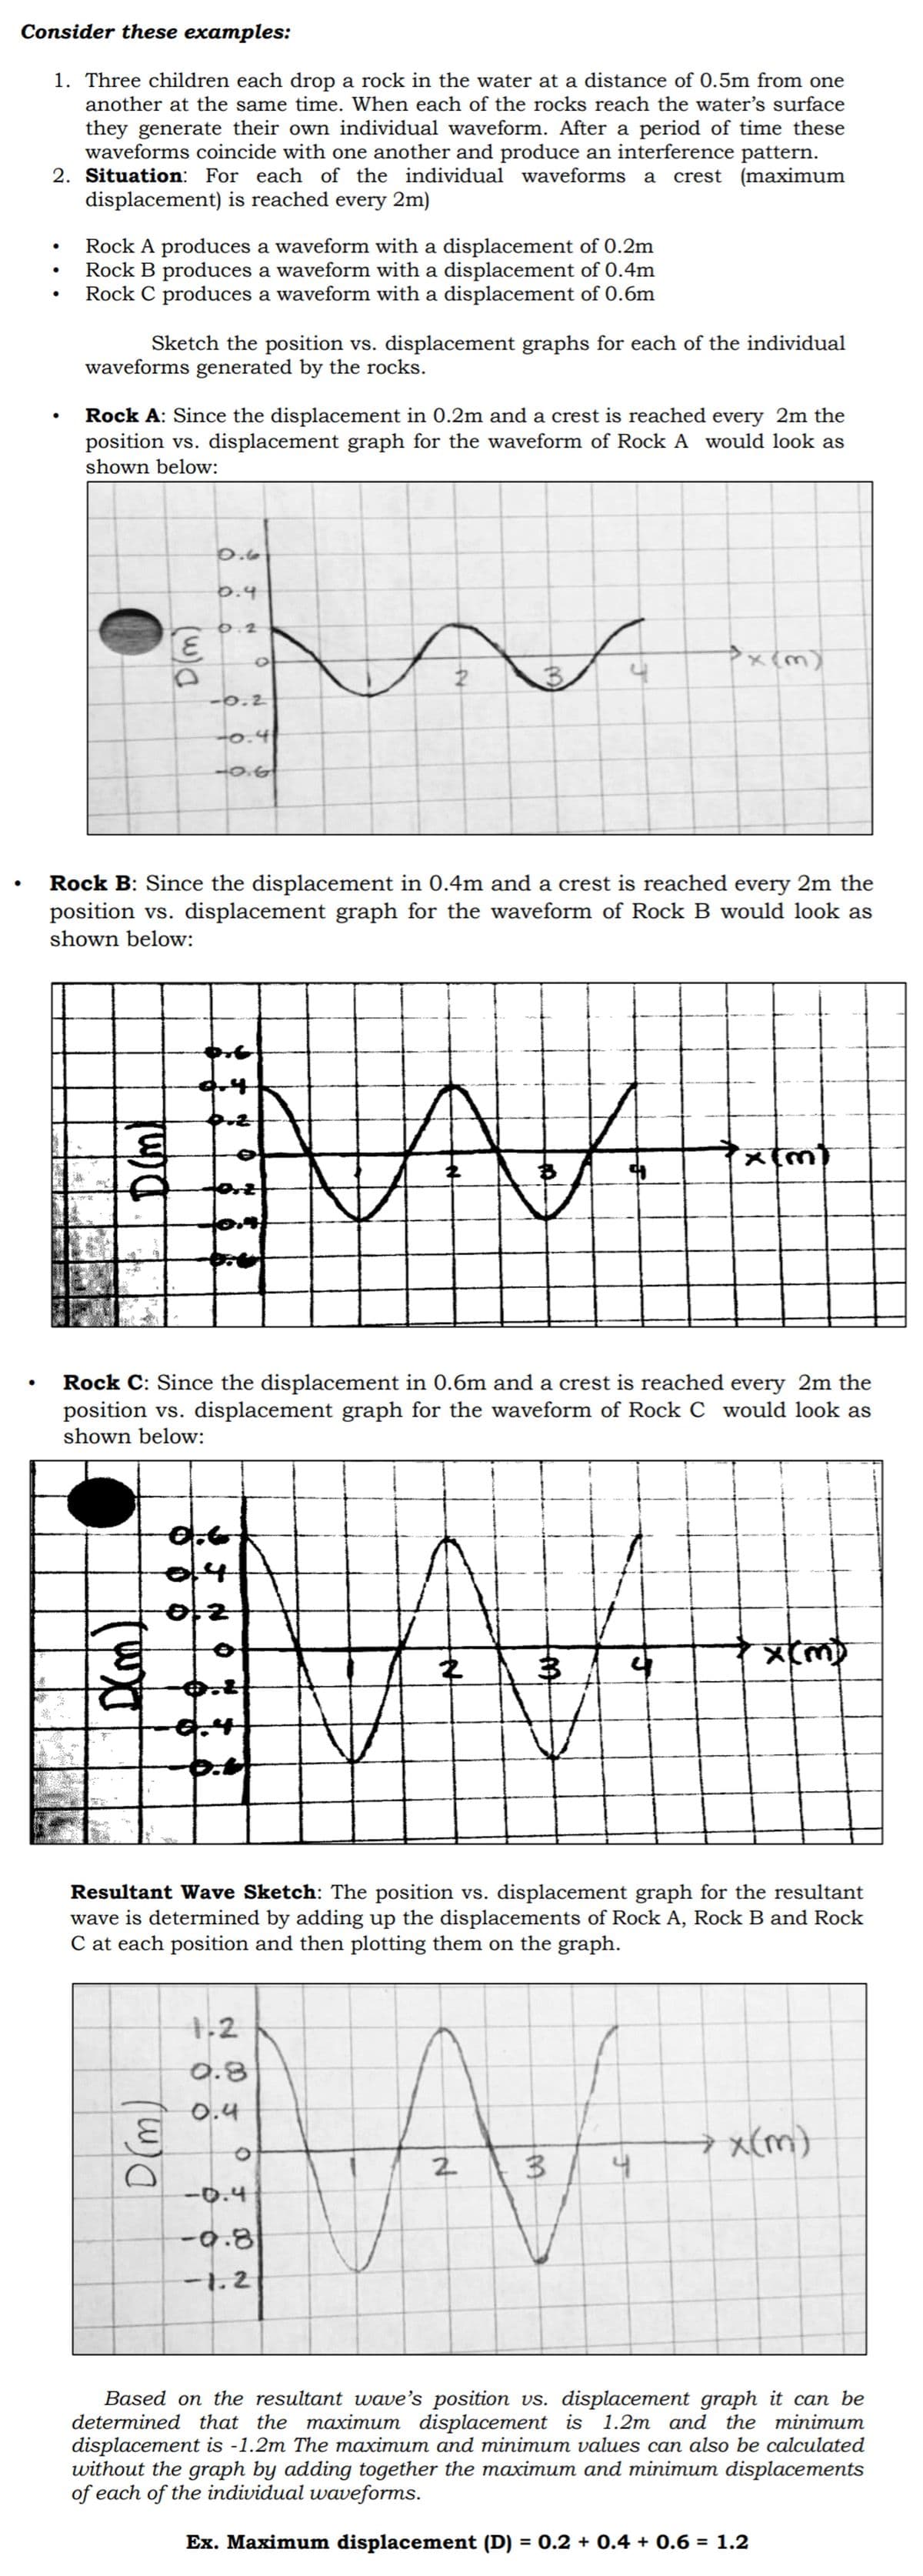 Consider these examples:
1. Three children each drop a rock in the water at a distance of 0.5m from one
another at the same time. When each of the rocks reach the water's surface
they generate their own individual waveform. After a period of time these
waveforms coincide with one another and produce an interference pattern.
2. Situation: For each of the individual waveforms a crest (maximum
displacement) is reached every 2m)
Rock A produces a waveform with a displacement of 0.2m
Rock B produces a waveform with a displacement of 0.4m
Rock C produces a waveform with a displacement of 0.6m
Sketch the position vs. displacement graphs for each of the individual
waveforms generated by the rocks.
Rock A: Since the displacement in 0.2m and a crest is reached every 2m the
position vs. displacement graph for the waveform of Rock A would look as
shown below:
O.6
6.4
O.2
-0.2
o.4
0.G
Rock B: Since the displacement in 0.4m and a crest is reached every 2m the
position vs. displacement graph for the waveform of Rock B would look as
shown below:
Rock C: Since the displacement in 0.6m and a crest is reached every 2m the
position vs. displacement graph for the waveform of Rock C would look as
shown below:
G.4
Resultant Wave Sketch: The position vs. displacement graph for the resultant
wave is determined by adding up the displacements of Rock A, Rock B and Rock
C at each position and then plotting them on the graph.
+.2
0.8
0.4
→x(m)
2.
-0.4
-0.8
-1.2
Based on the resultant wave's position vs. displacement graph it can be
determined that the maximum displacement is 1.2m and the minimum
displacement is -1.2m The maximum and minimum values can also be calculated
without the graph by adding together the maximum and minimum displacements
of each of the individual waveforms.
Ex. Maximum displacement (D) = 0.2 + 0.4 + 0.6 = 1.2
(w))
